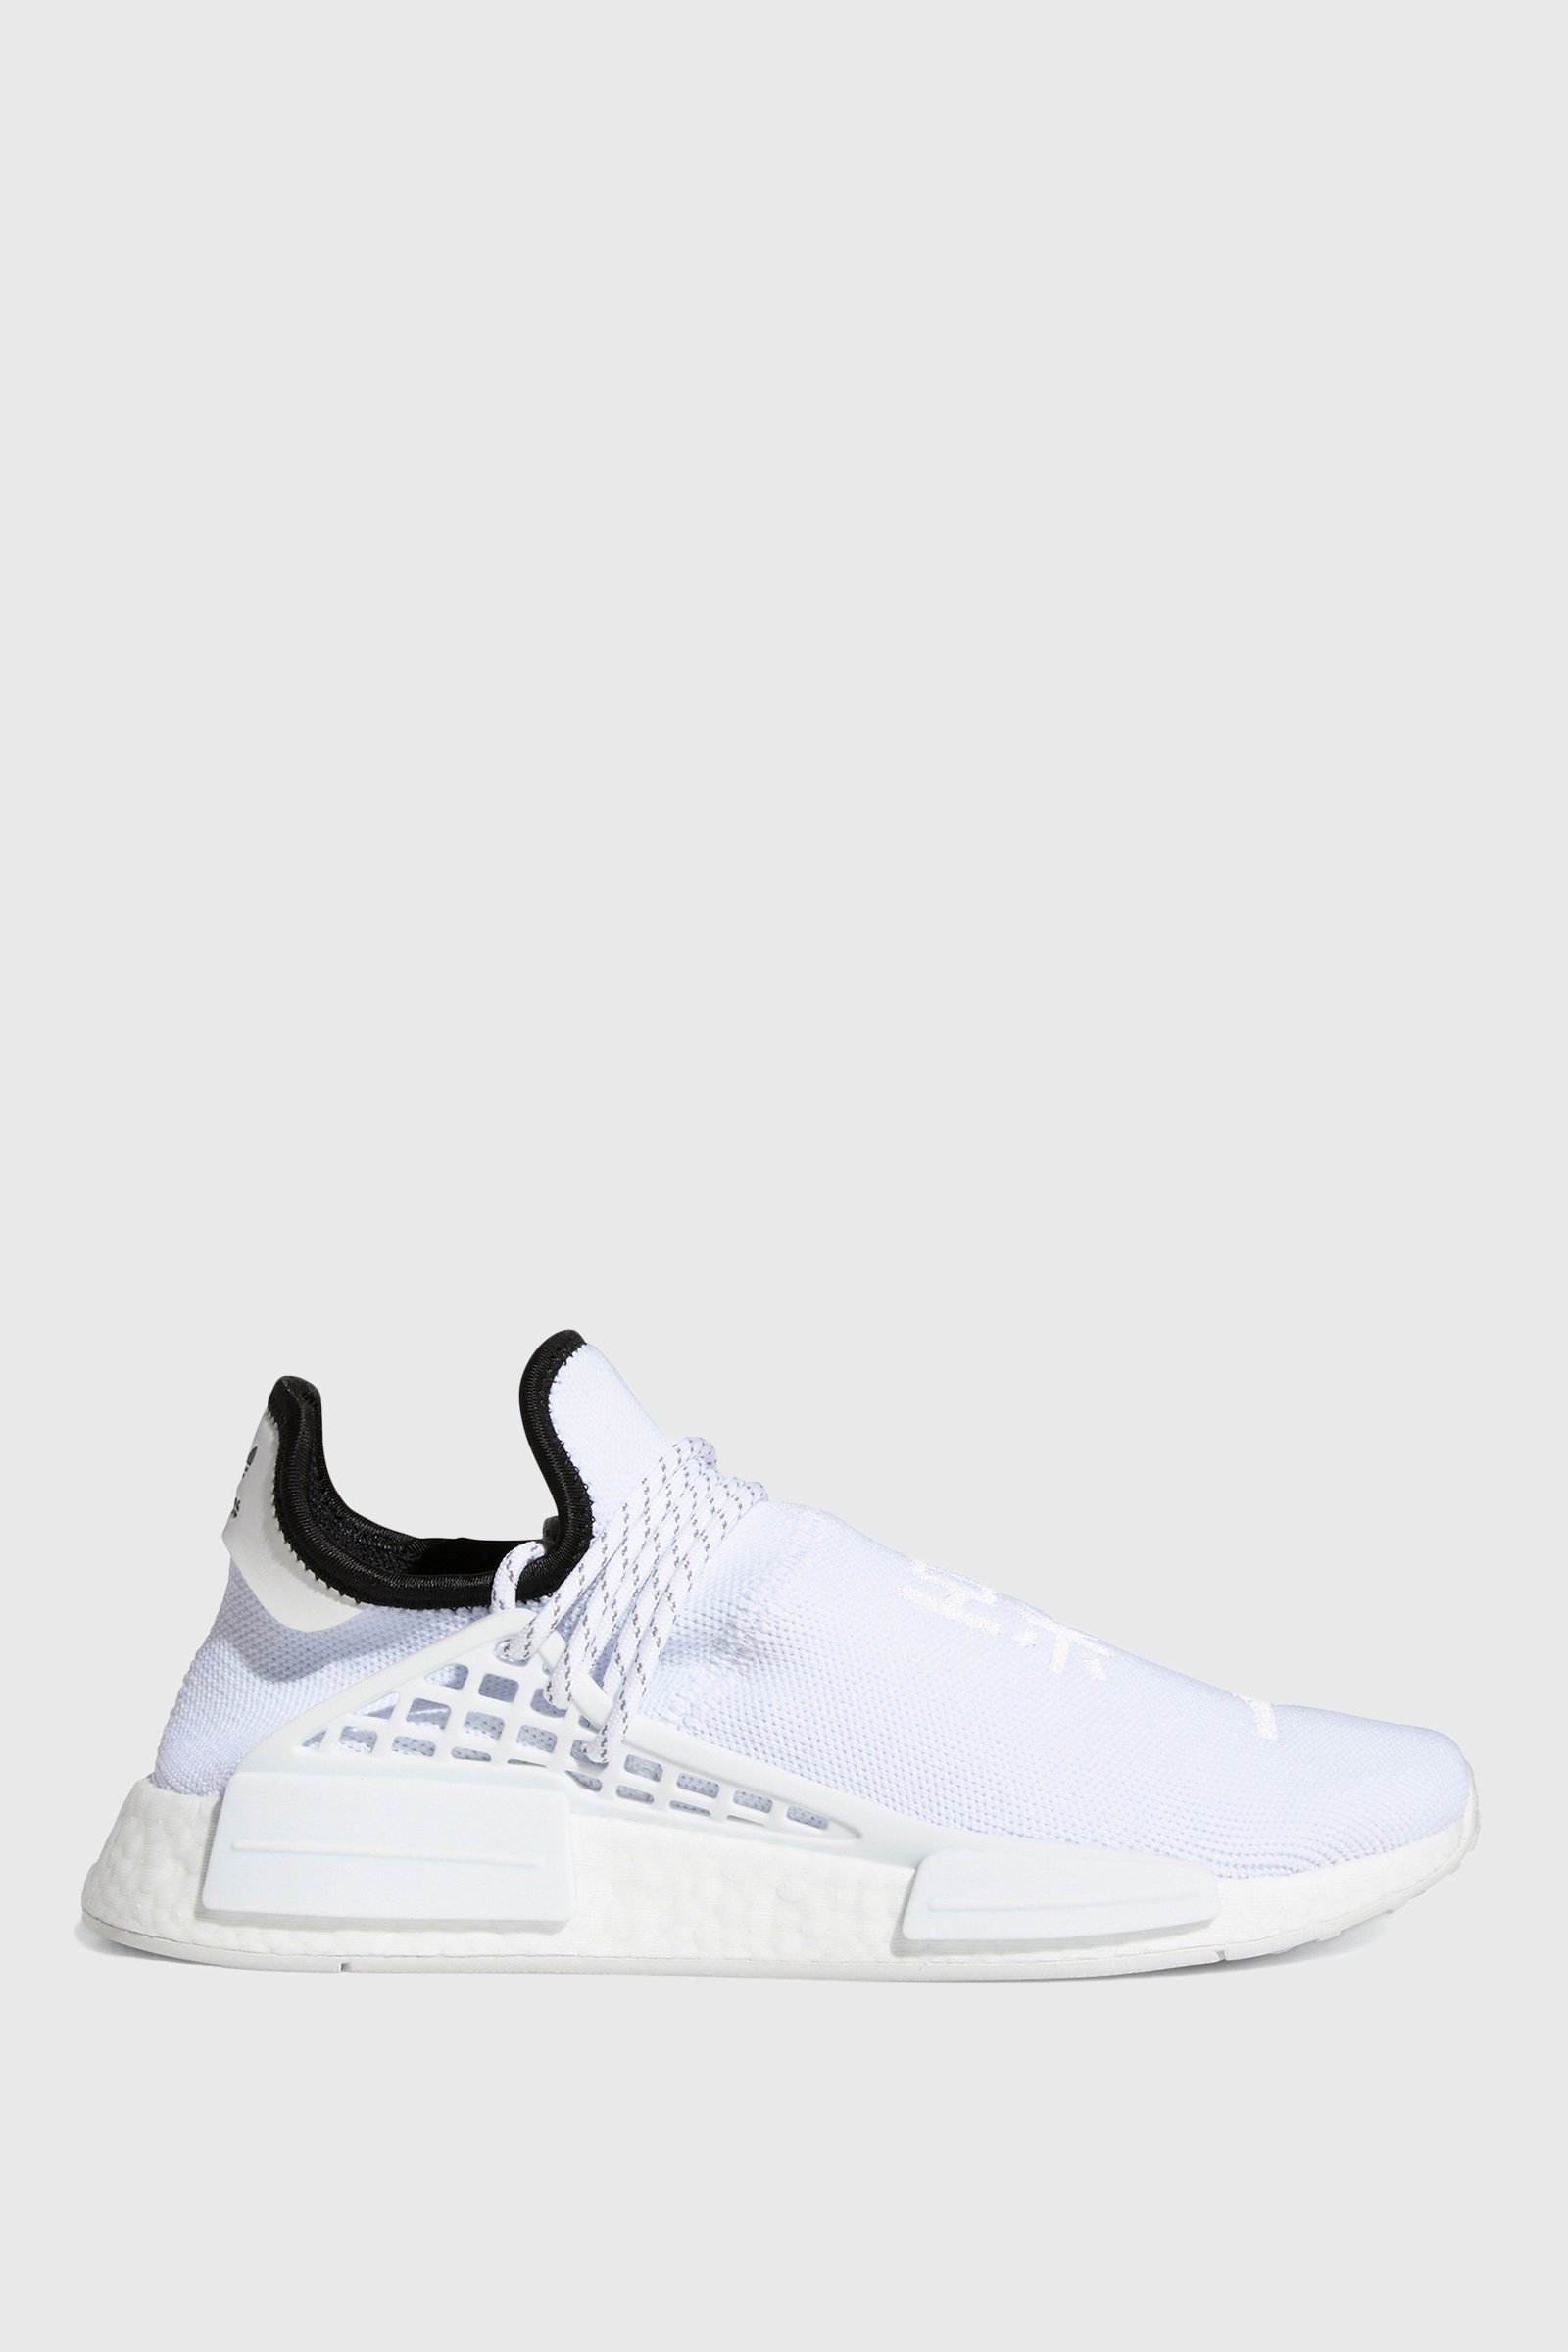 nmd shoe cleaner